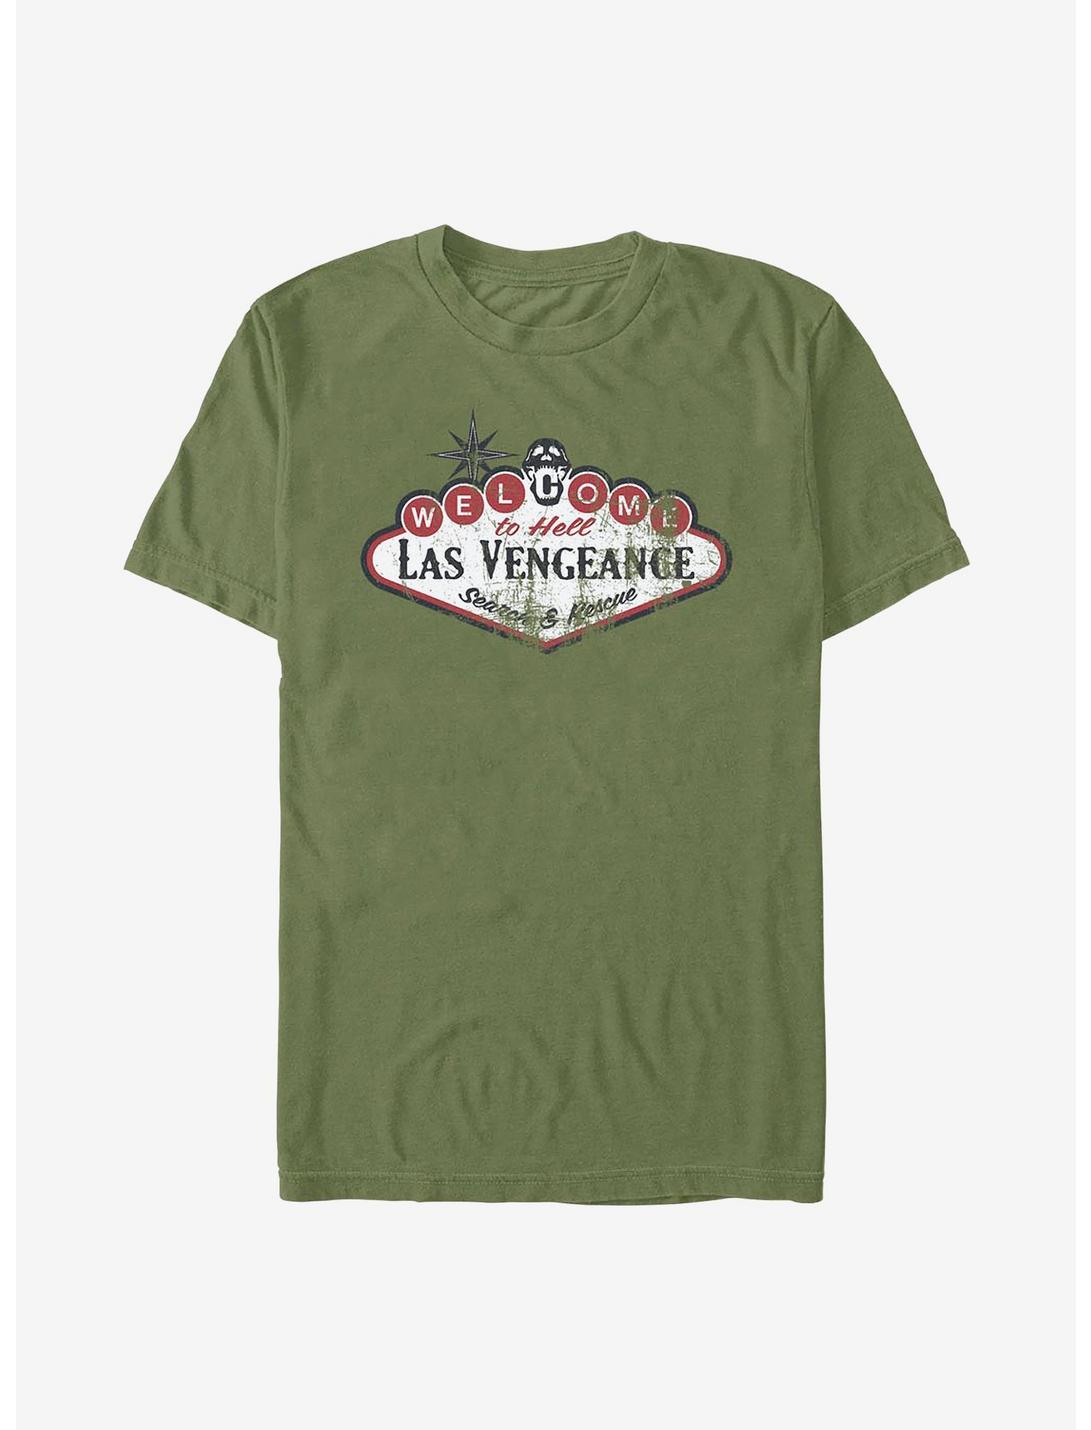 Army Of The Dead Las Vengeance T-Shirt, MIL GRN, hi-res